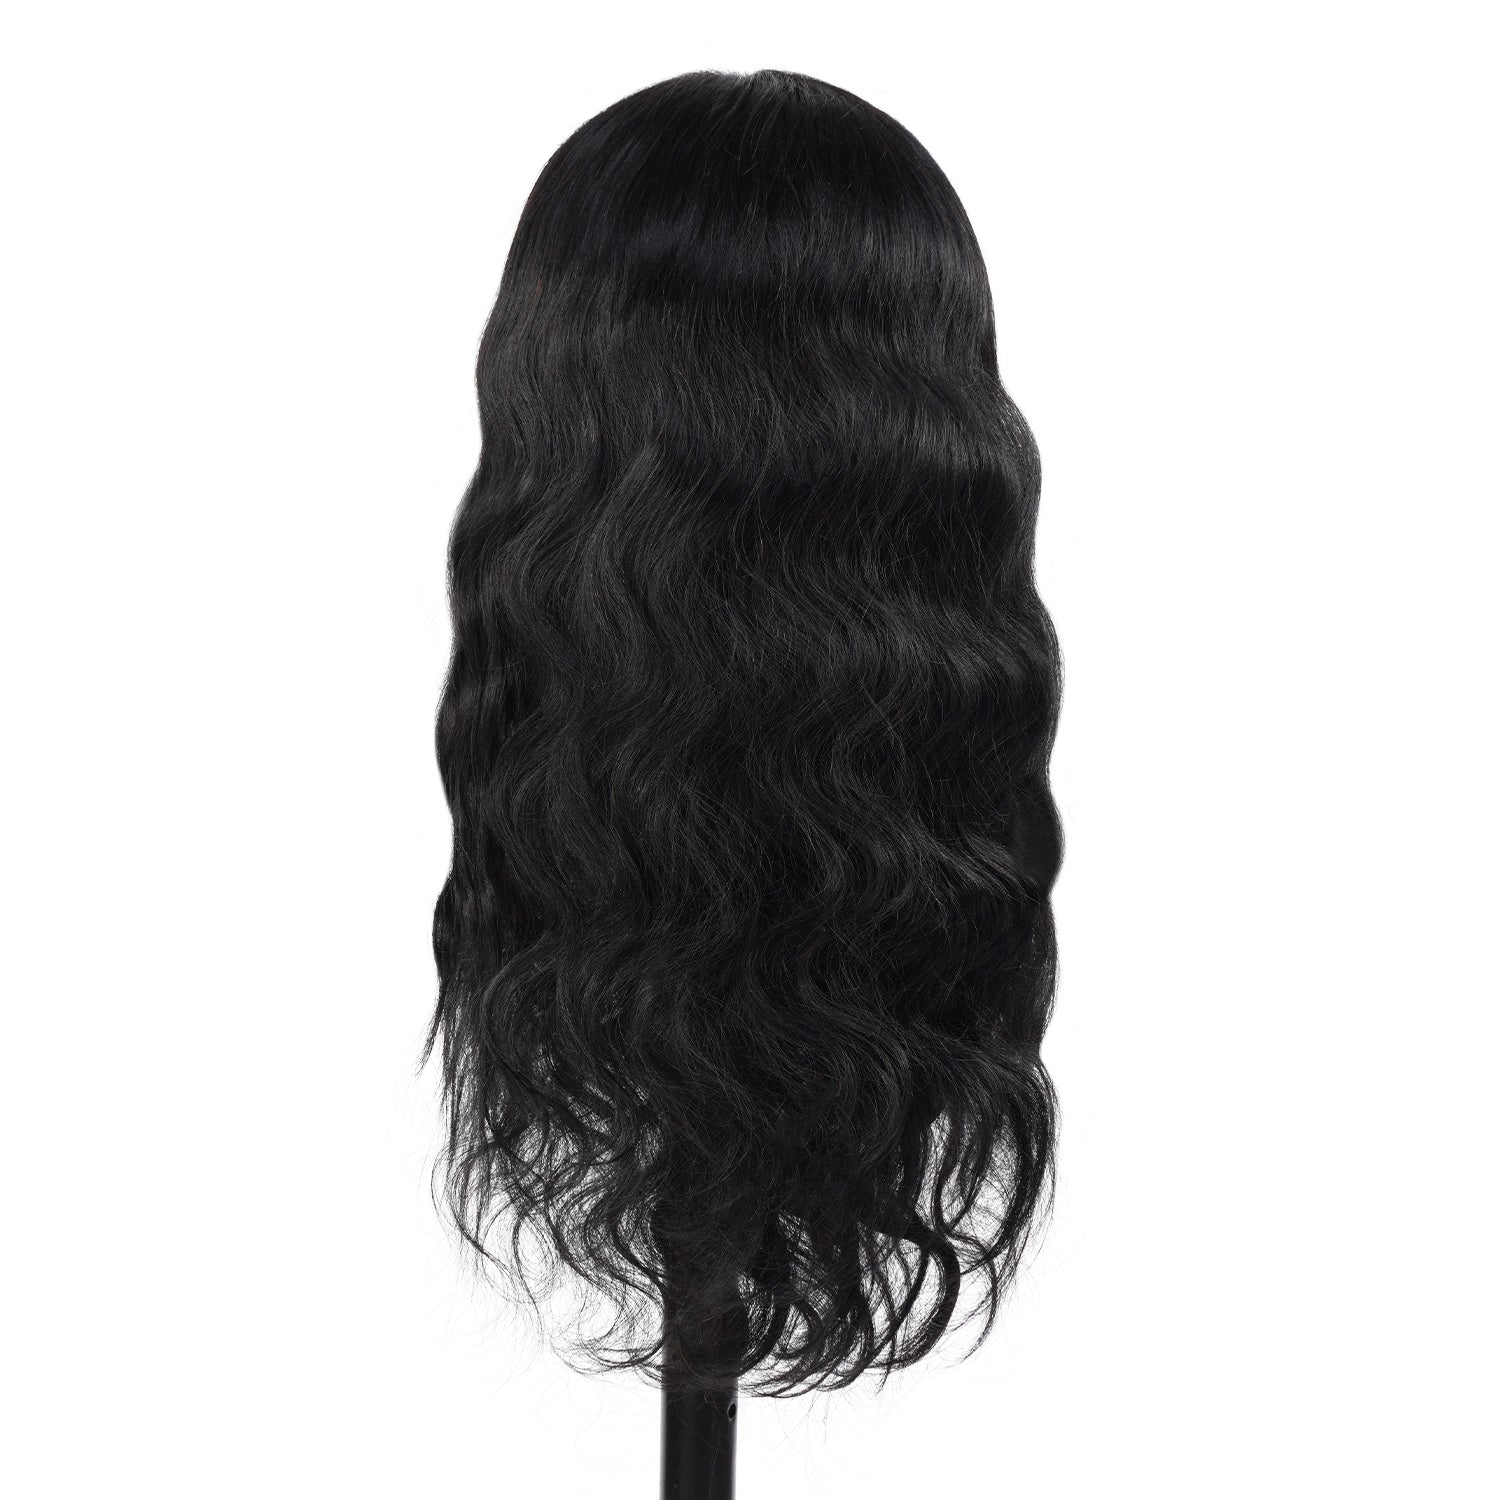 UpScale 100% Unprocessed Brazilian Virgin Remy Human Hair Full Lace Wig Body Wave